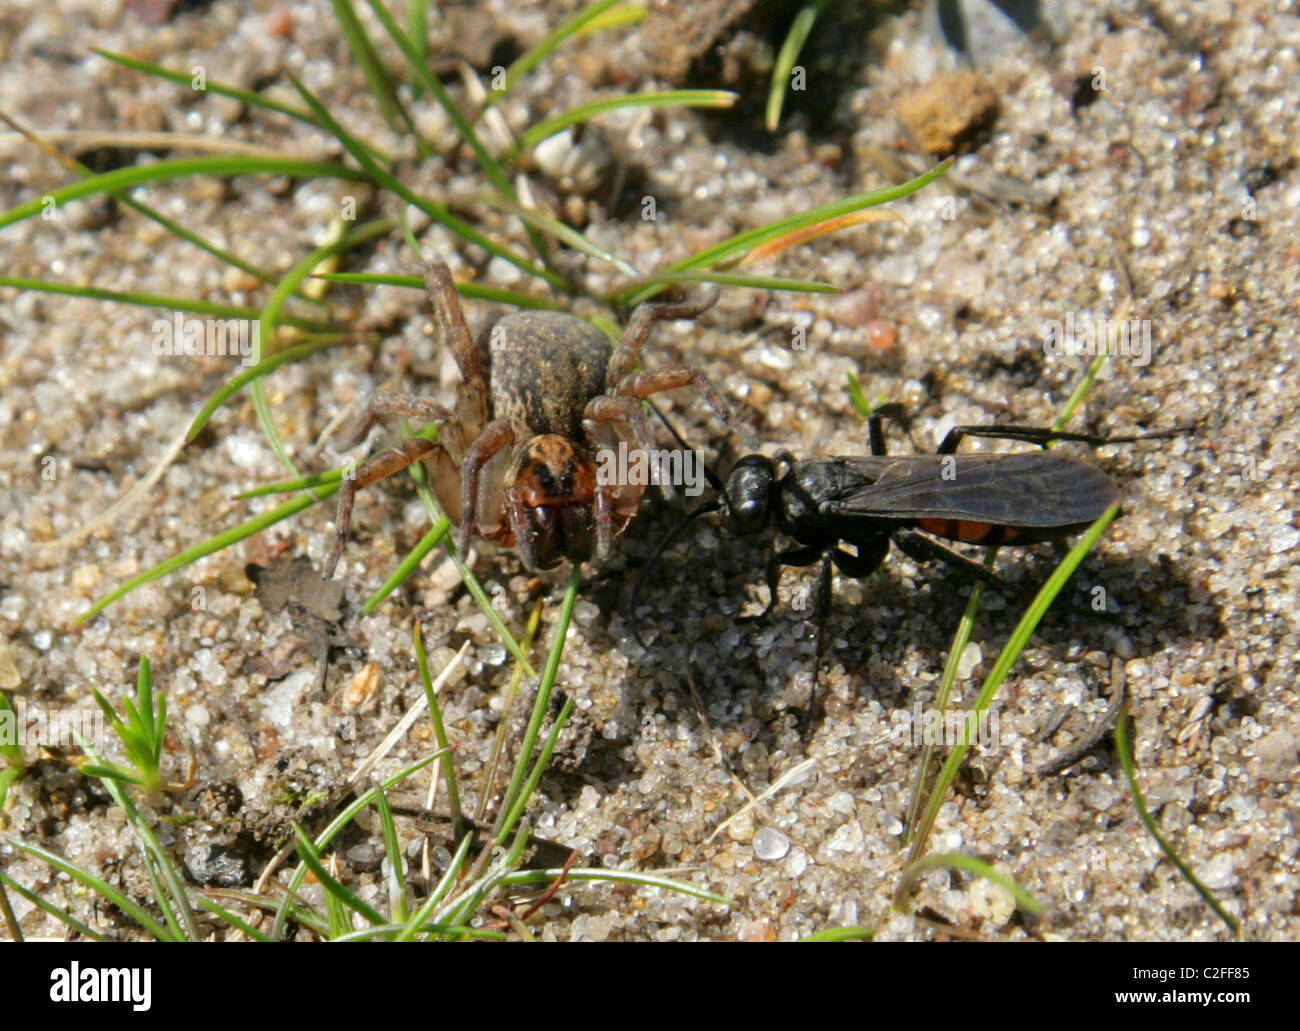 Black Banded Spider Wasp, Anoplius viaticus, Pompilidae, Hymenoptera. Attacking and paralysing a small Wolf Spider. Stock Photo